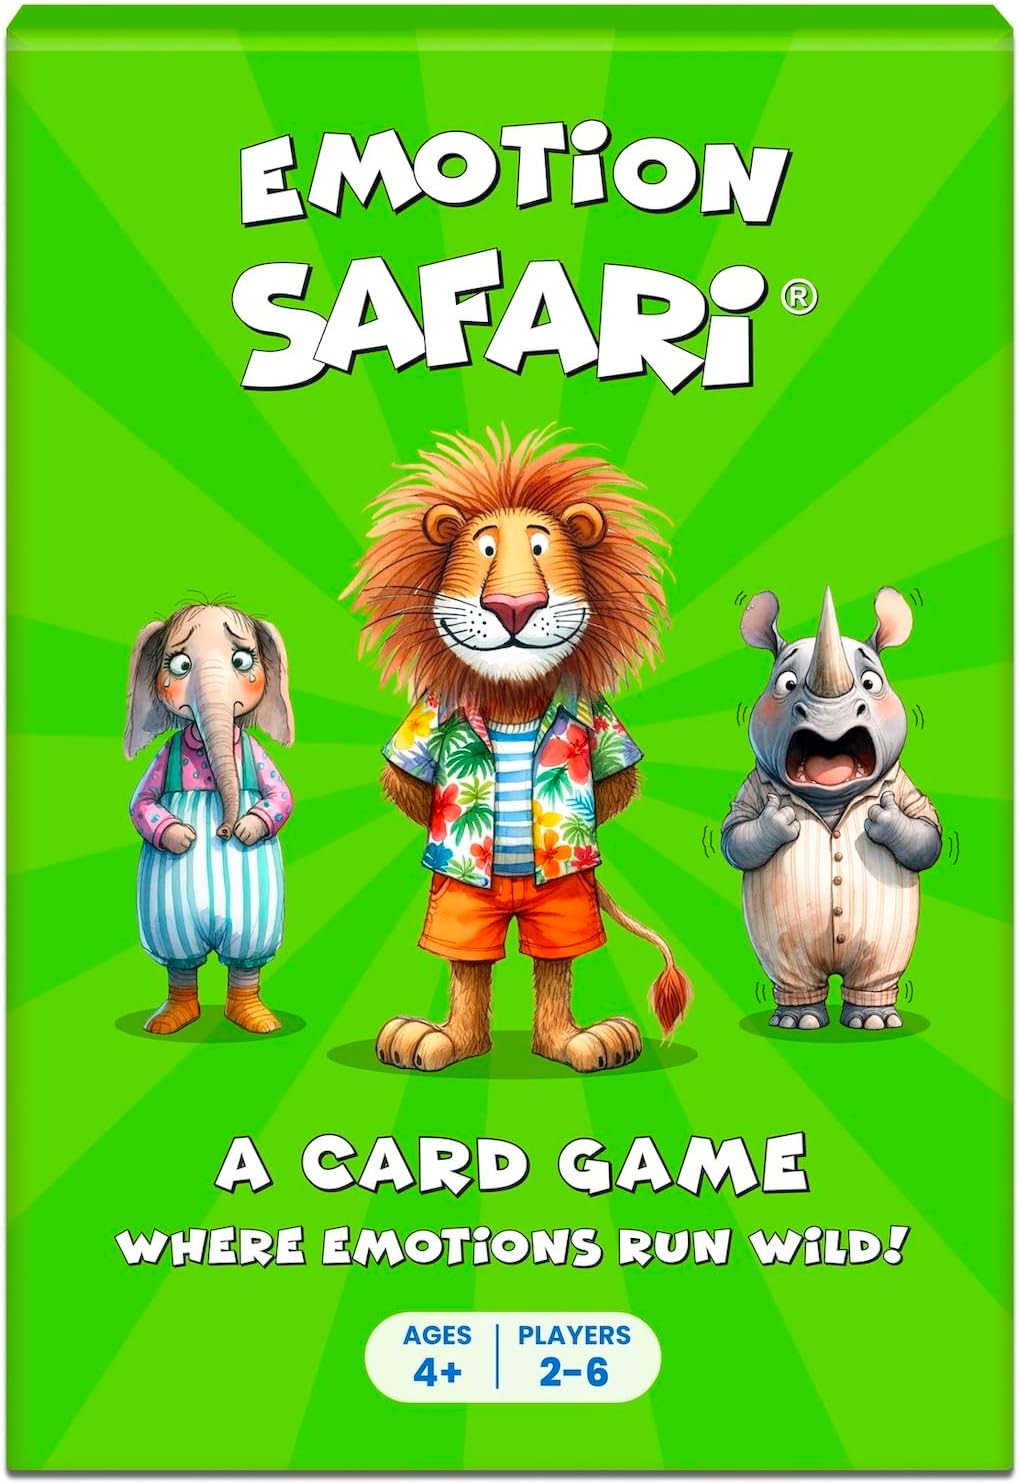 Fun Animal Card Game for Kids Ages 4+, 2-6 Players, Boosts Emotional Learning Skills!